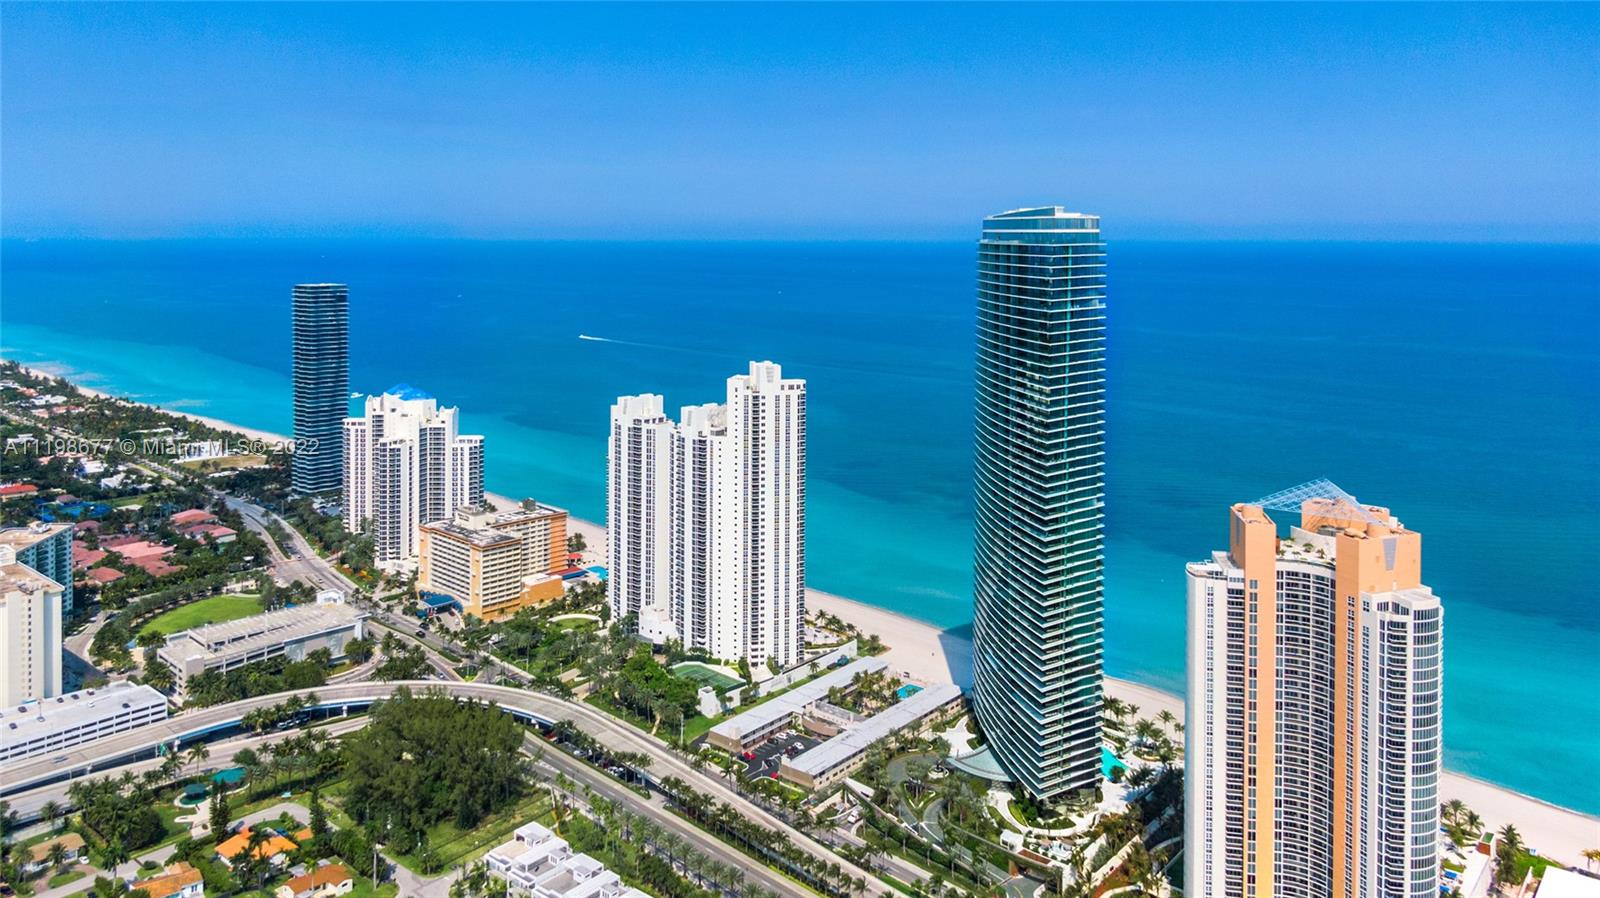 Residences by Armani Casa Armani Apt 4702 Closed Sale in Sunny Isles Beach,  FL - Presented by Mark Zilbert on  - MLS A11198677